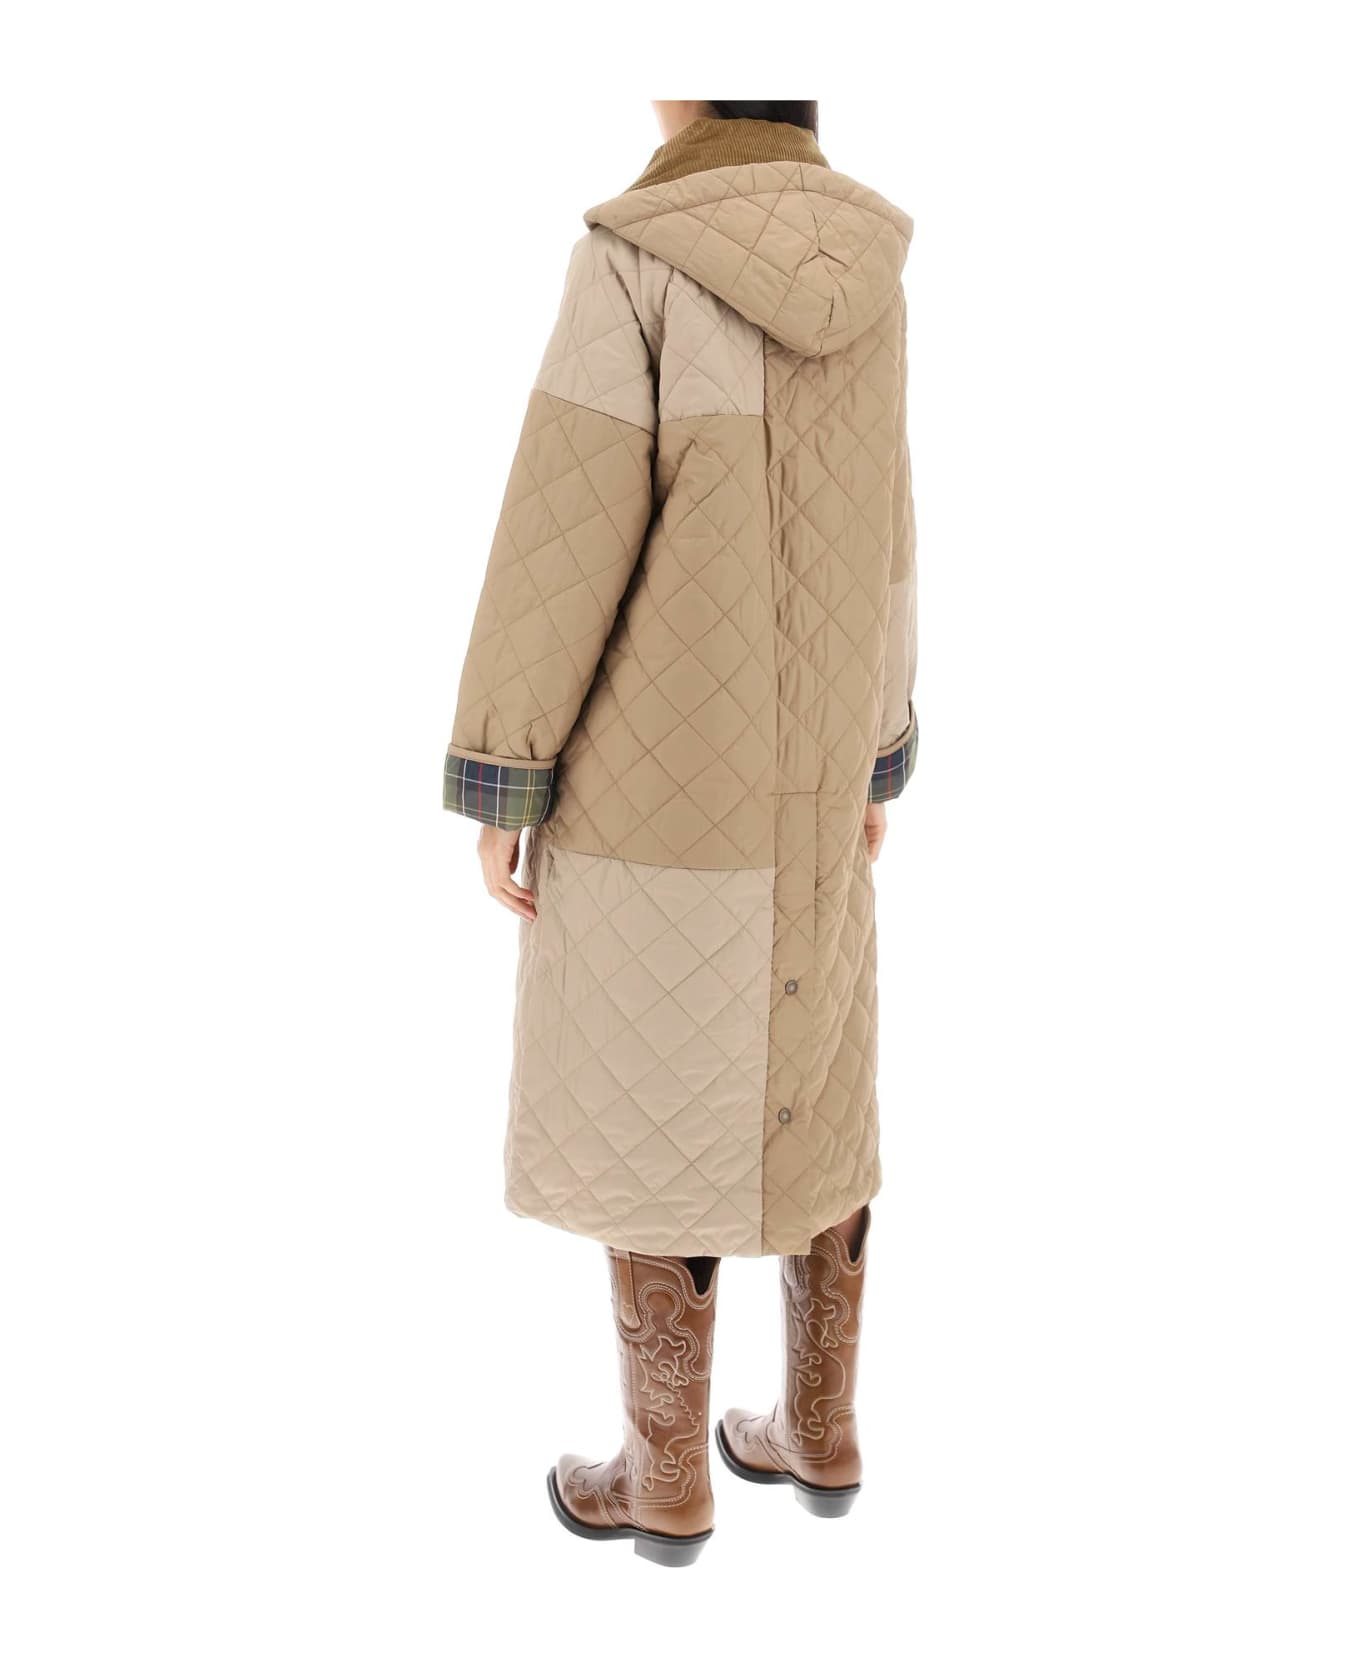 Barbour Burghley Quilted Trench Coat - HONEY LT TRENCH CLASSIC (Beige)